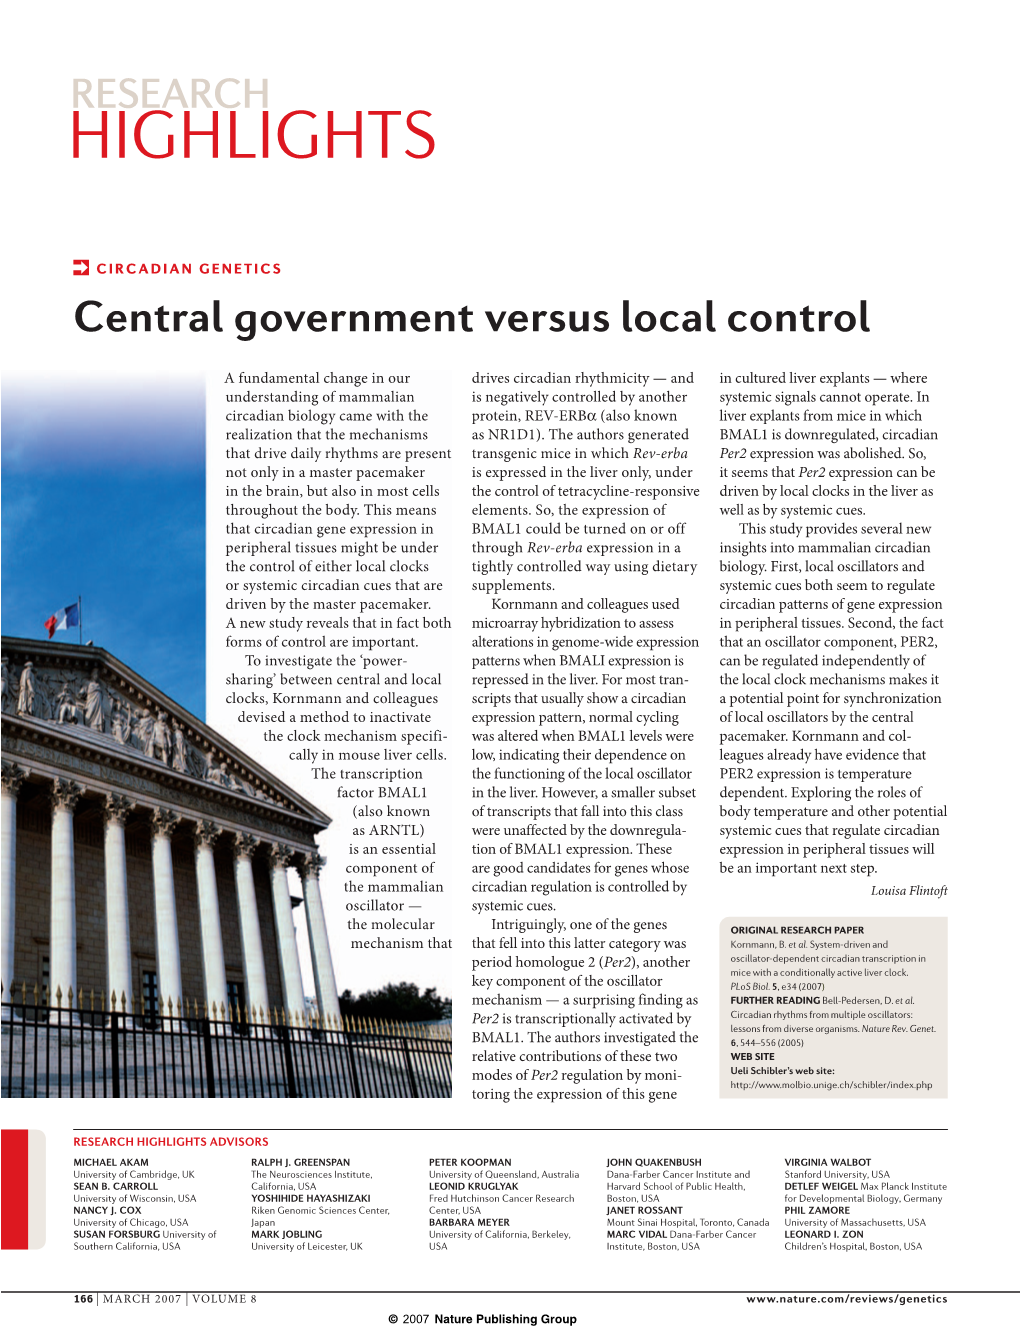 Central Government Versus Local Control